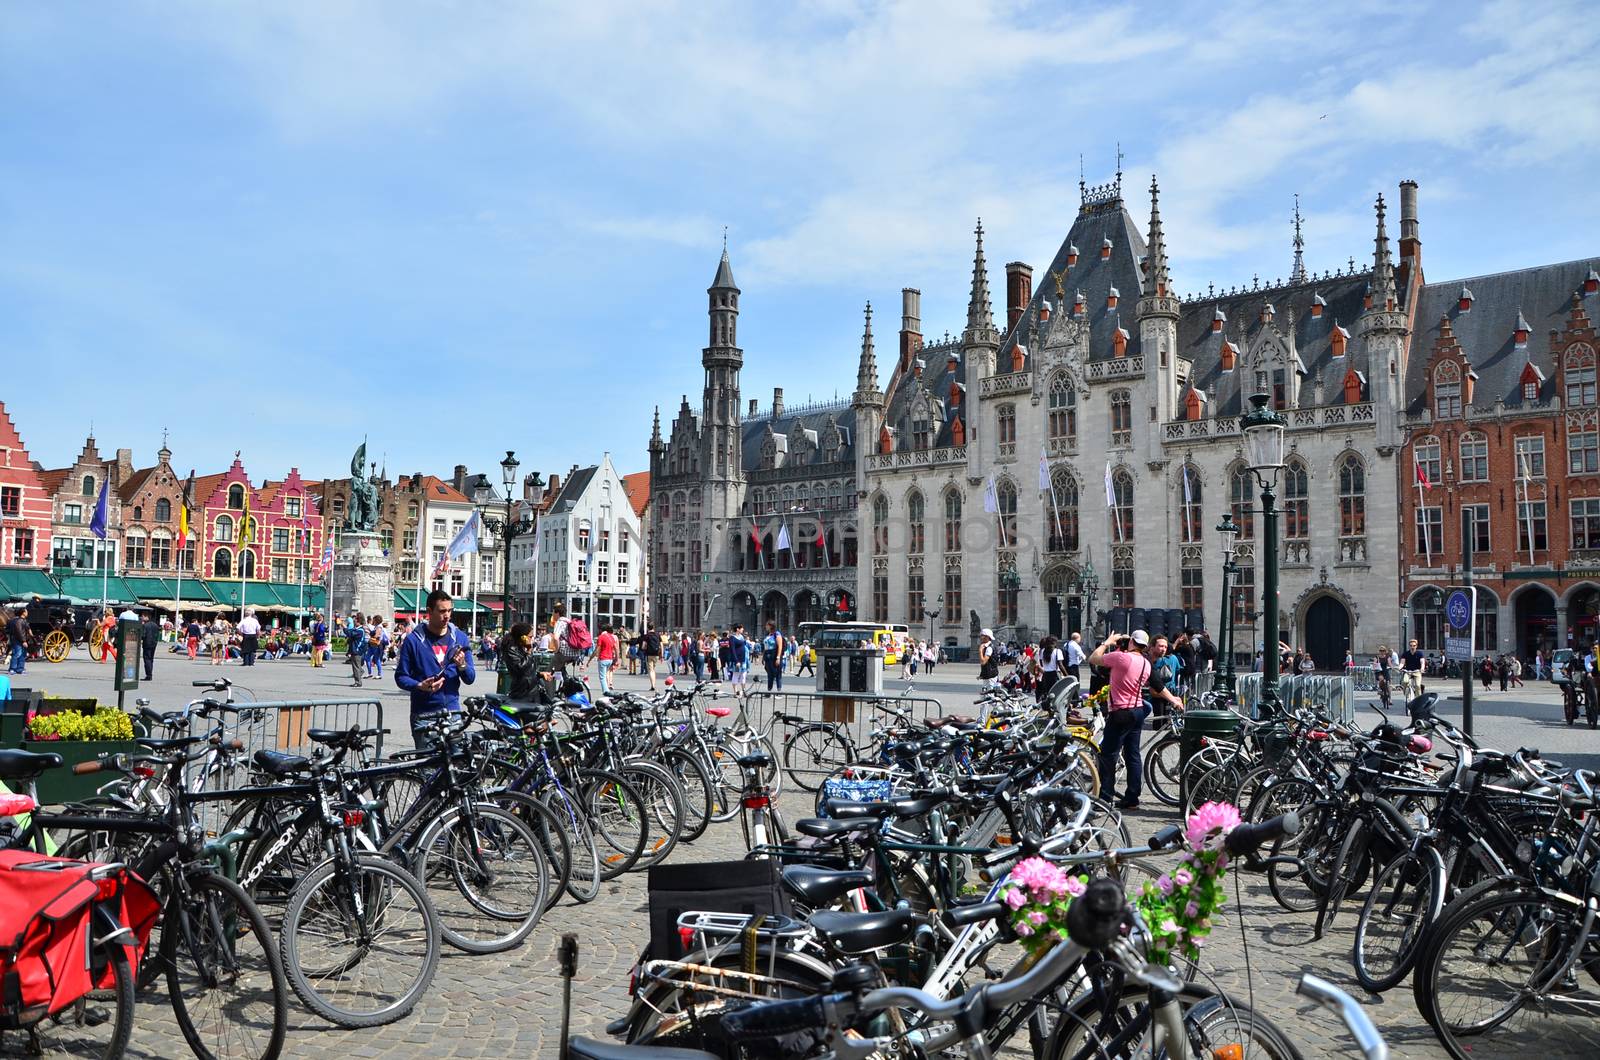 Bruges, Belgium - May 11, 2015: Tourist on Grote Markt square in Bruges, Belgium by siraanamwong